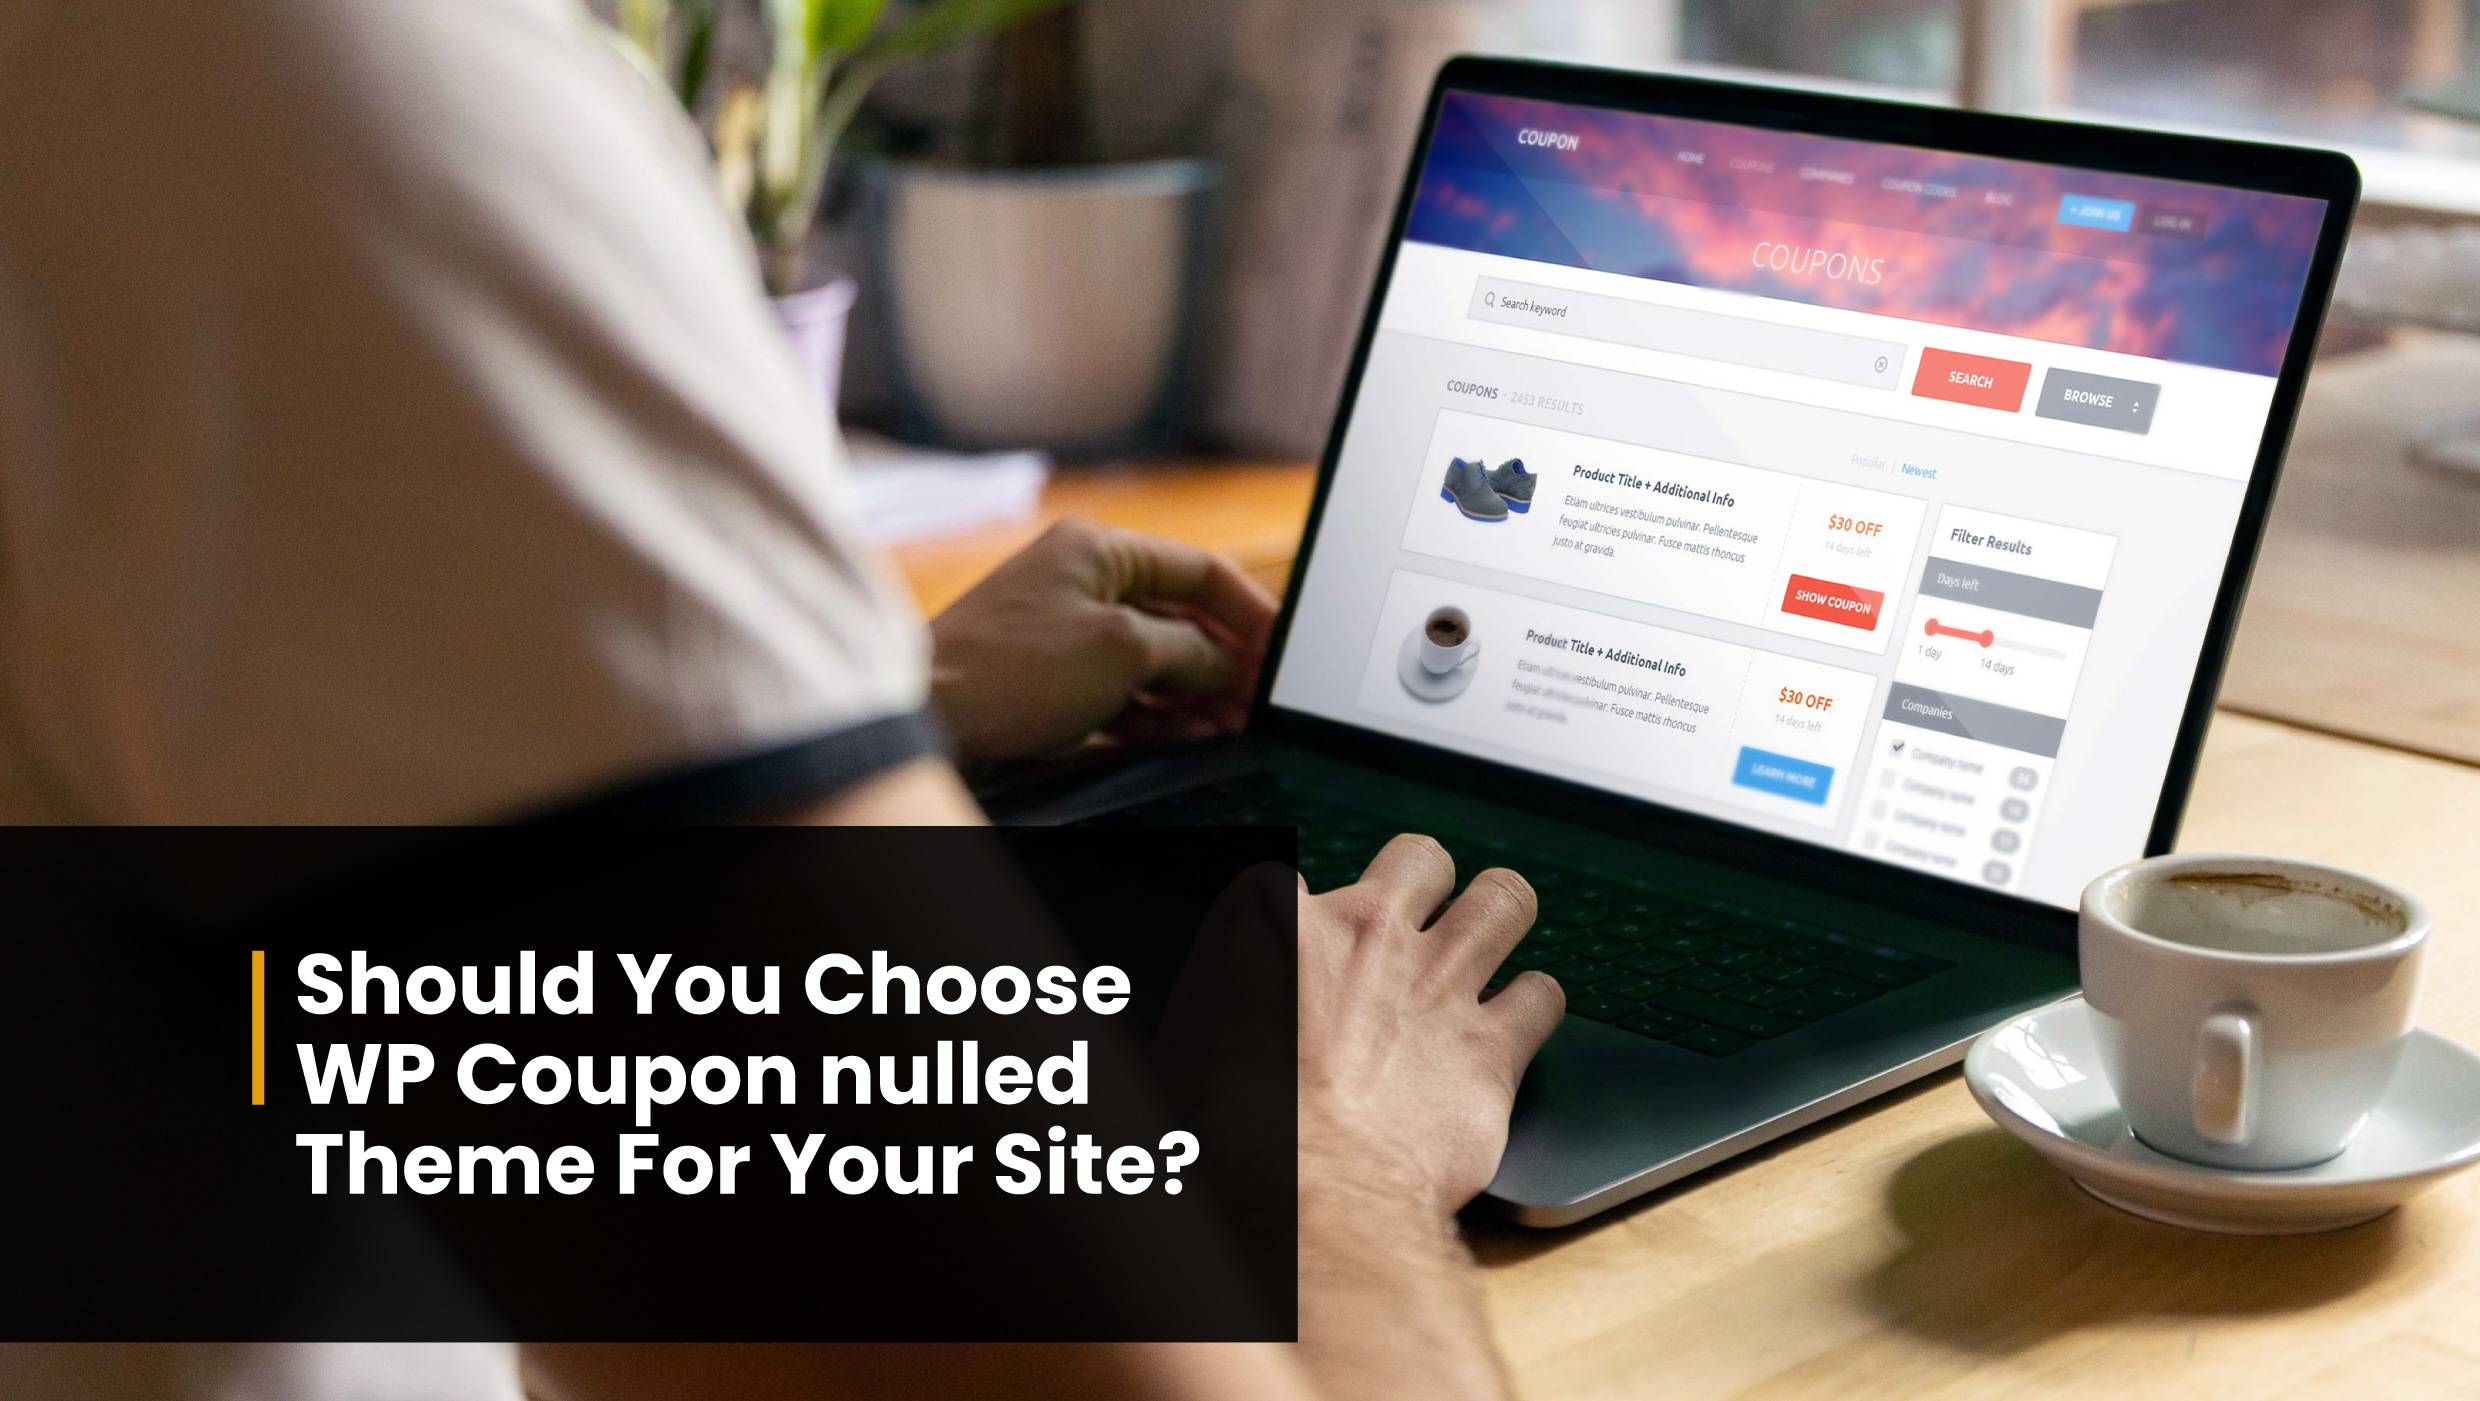 Free download of WP Coupon nulled theme